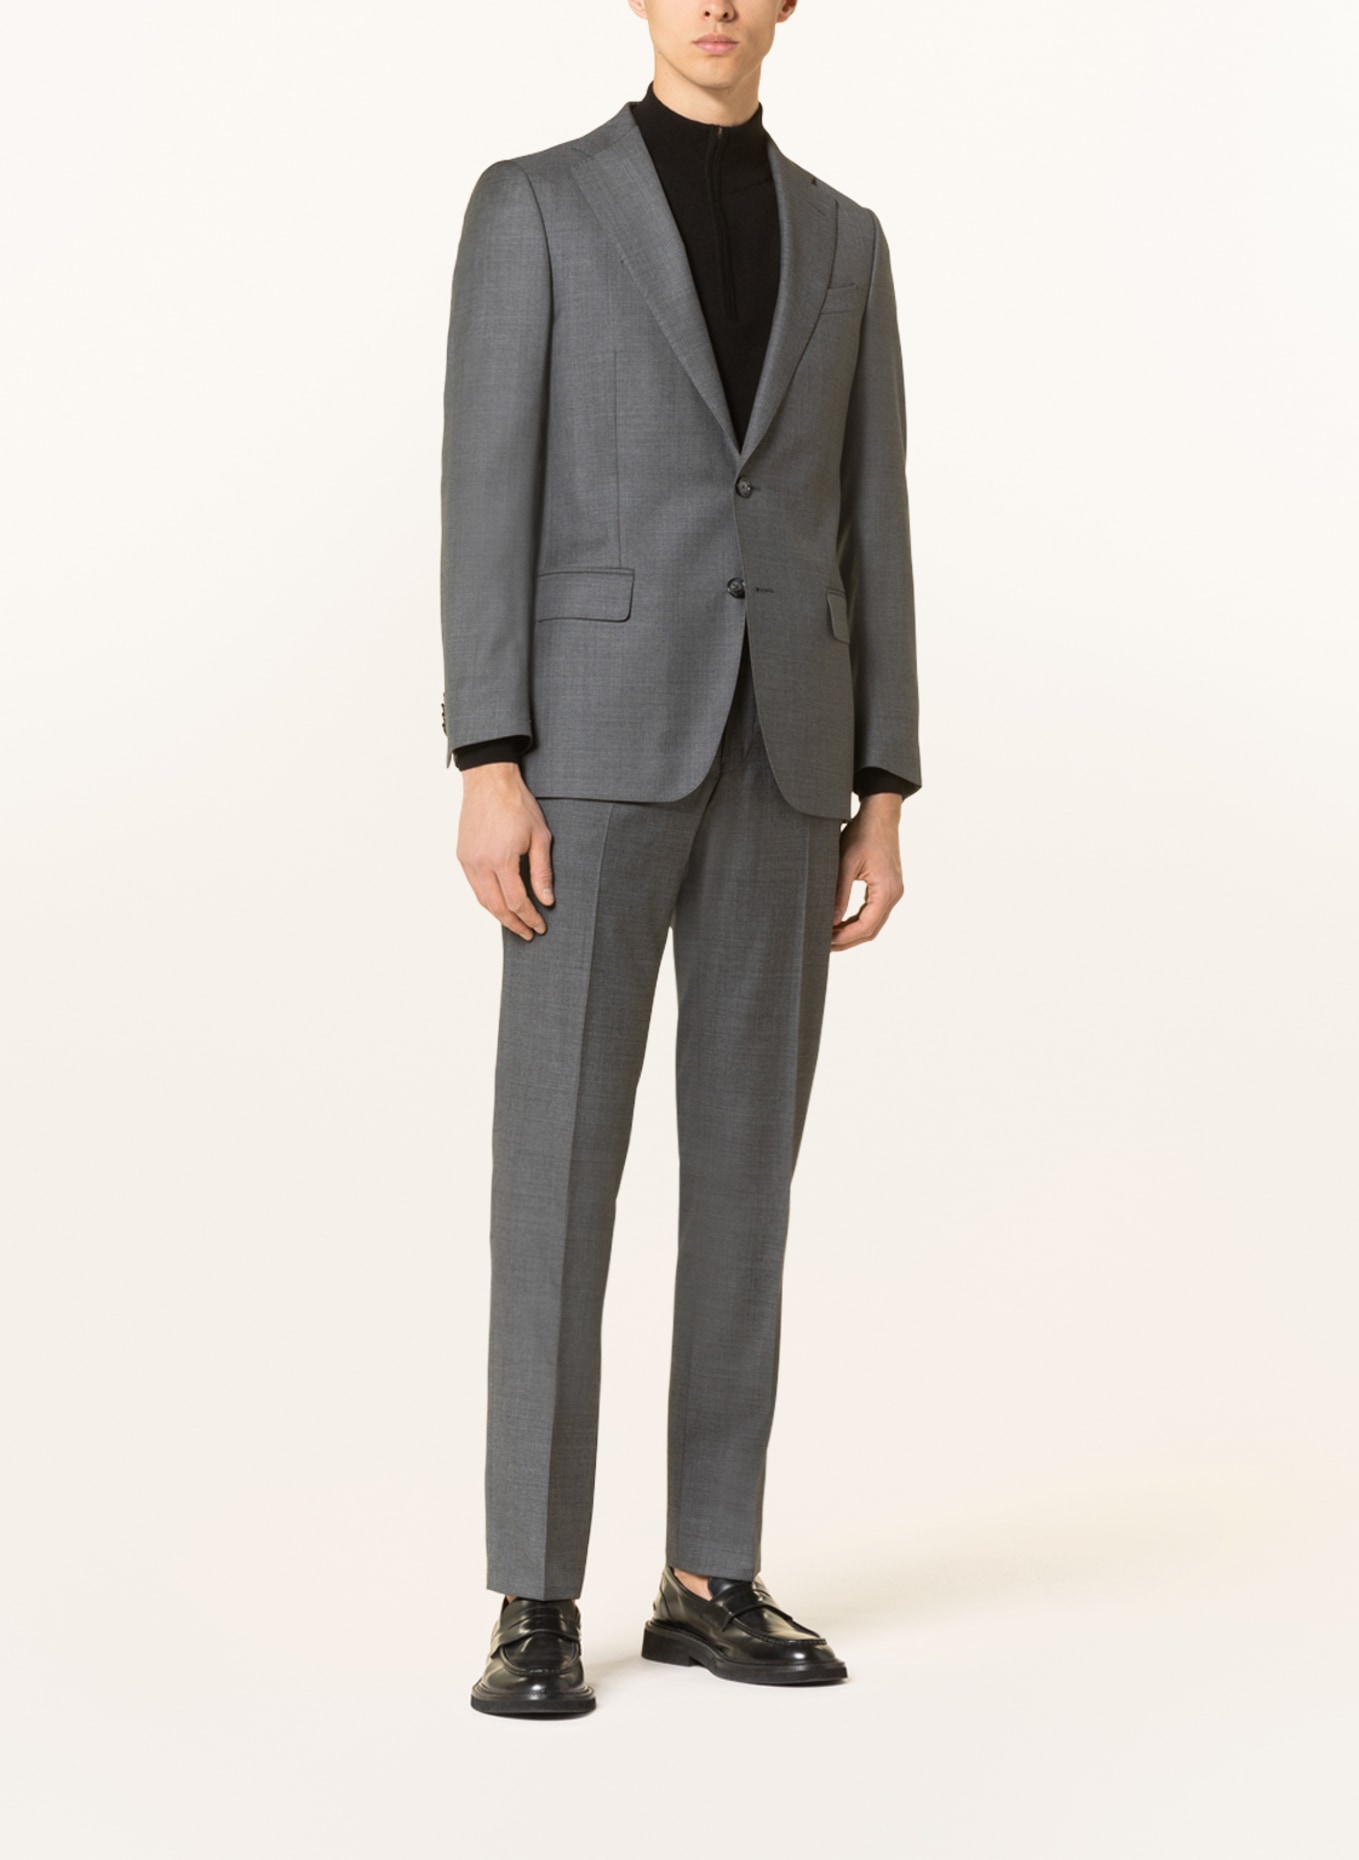 CHAS Suit jacket extra slim fit, Color: 1/74 Light Grey (Image 2)